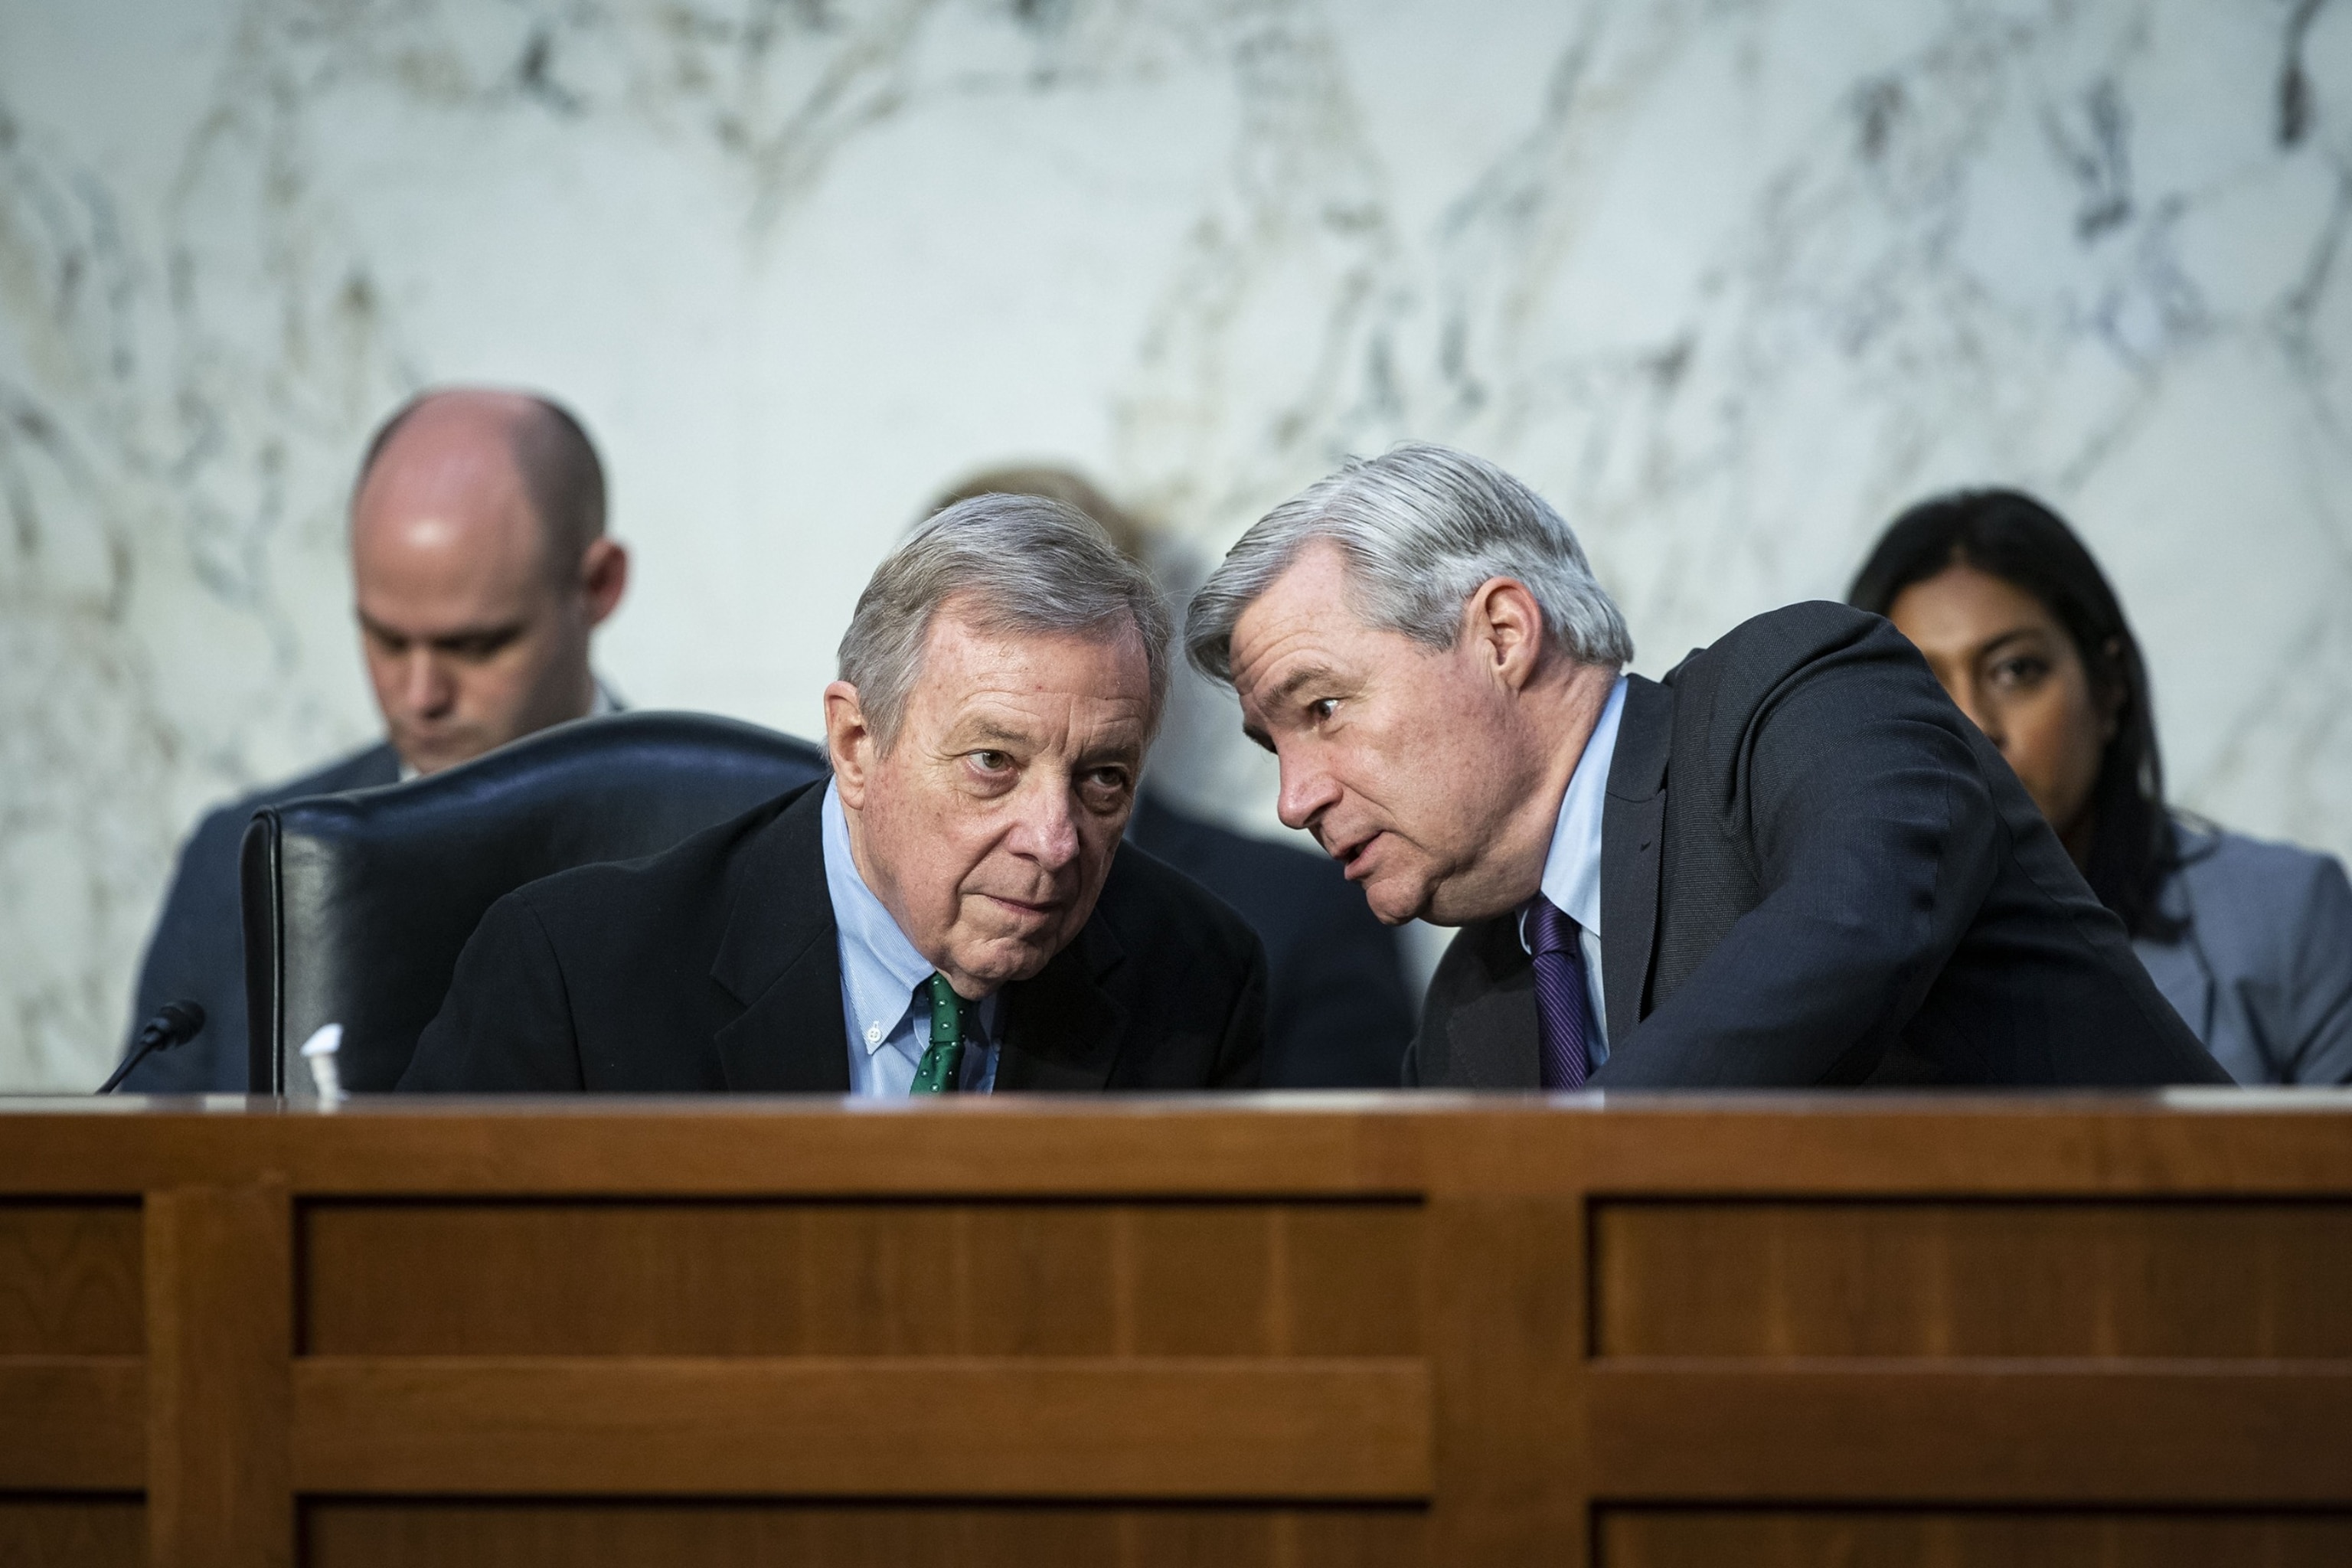 PHOTO: In this March 24, 2022, file photo, Senator Dick Durbin speaks with Senator Sheldon Whitehouse during a confirmation hearing for Ketanji Brown Jackson, associate justice of the U.S. Supreme Court, in Washington, D.C.